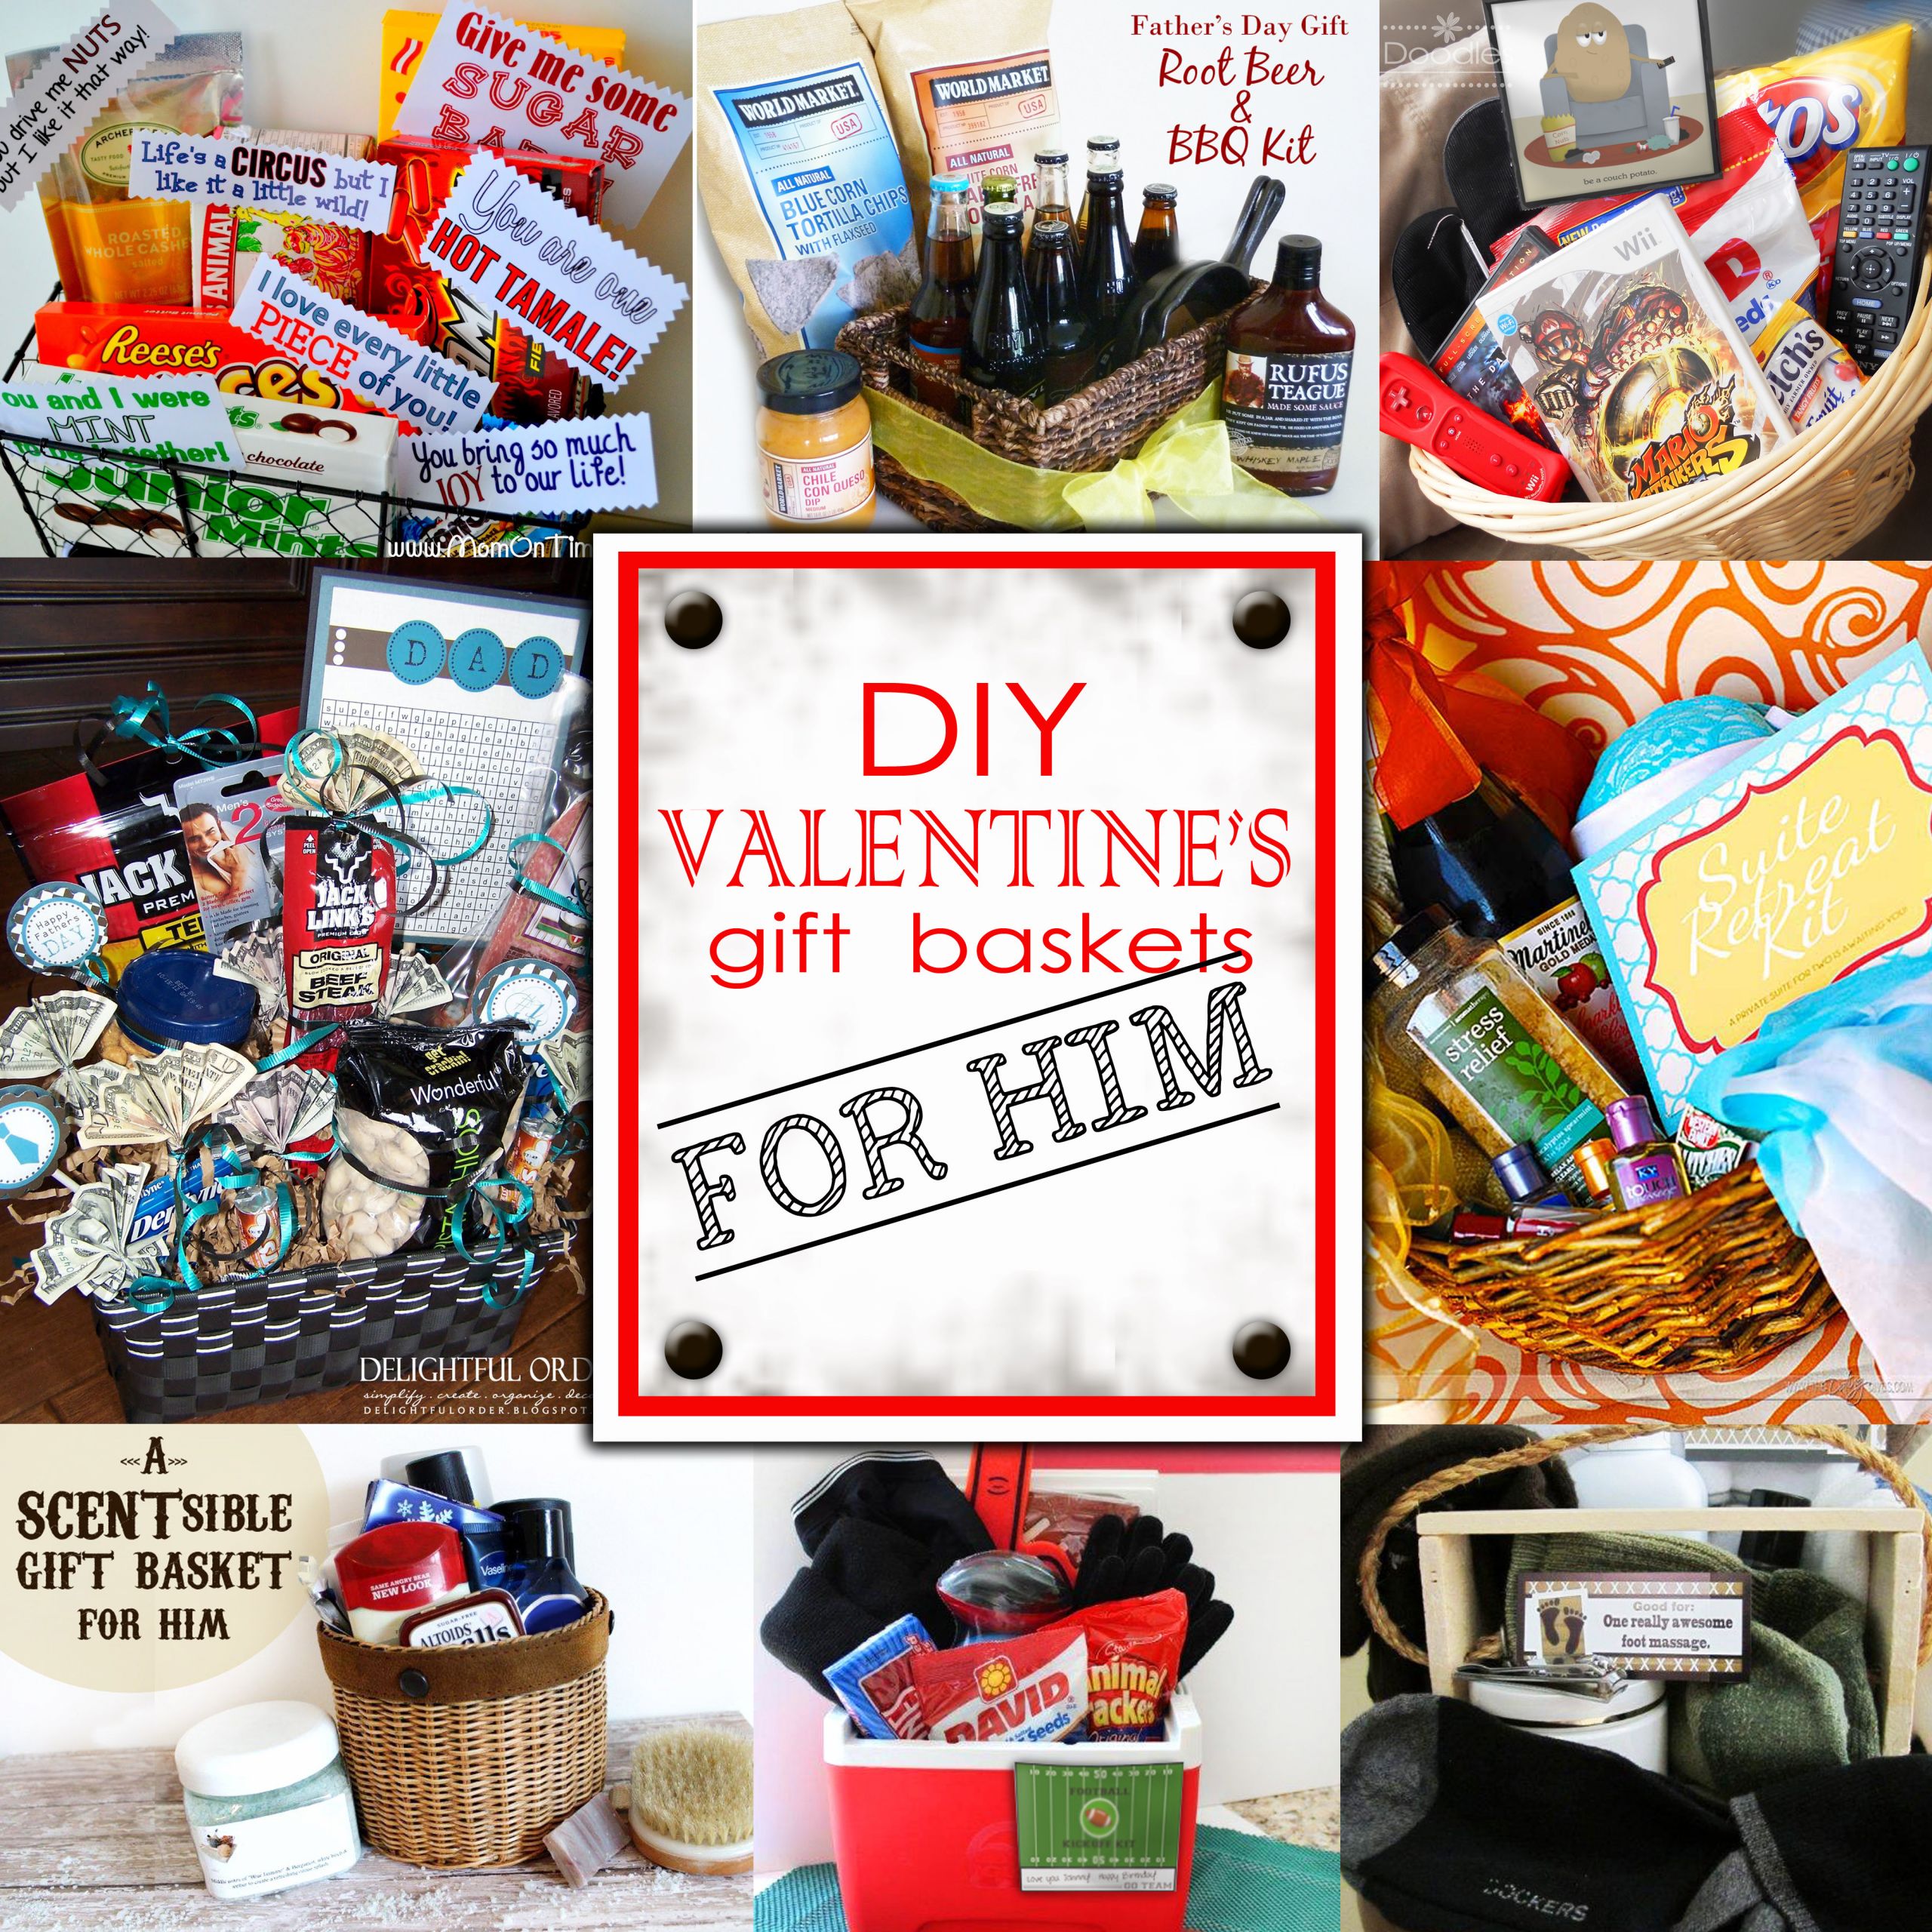 Valentine Days Gift Ideas for Him Awesome Diy Valentine S Day Gift Baskets for Him Darling Doodles